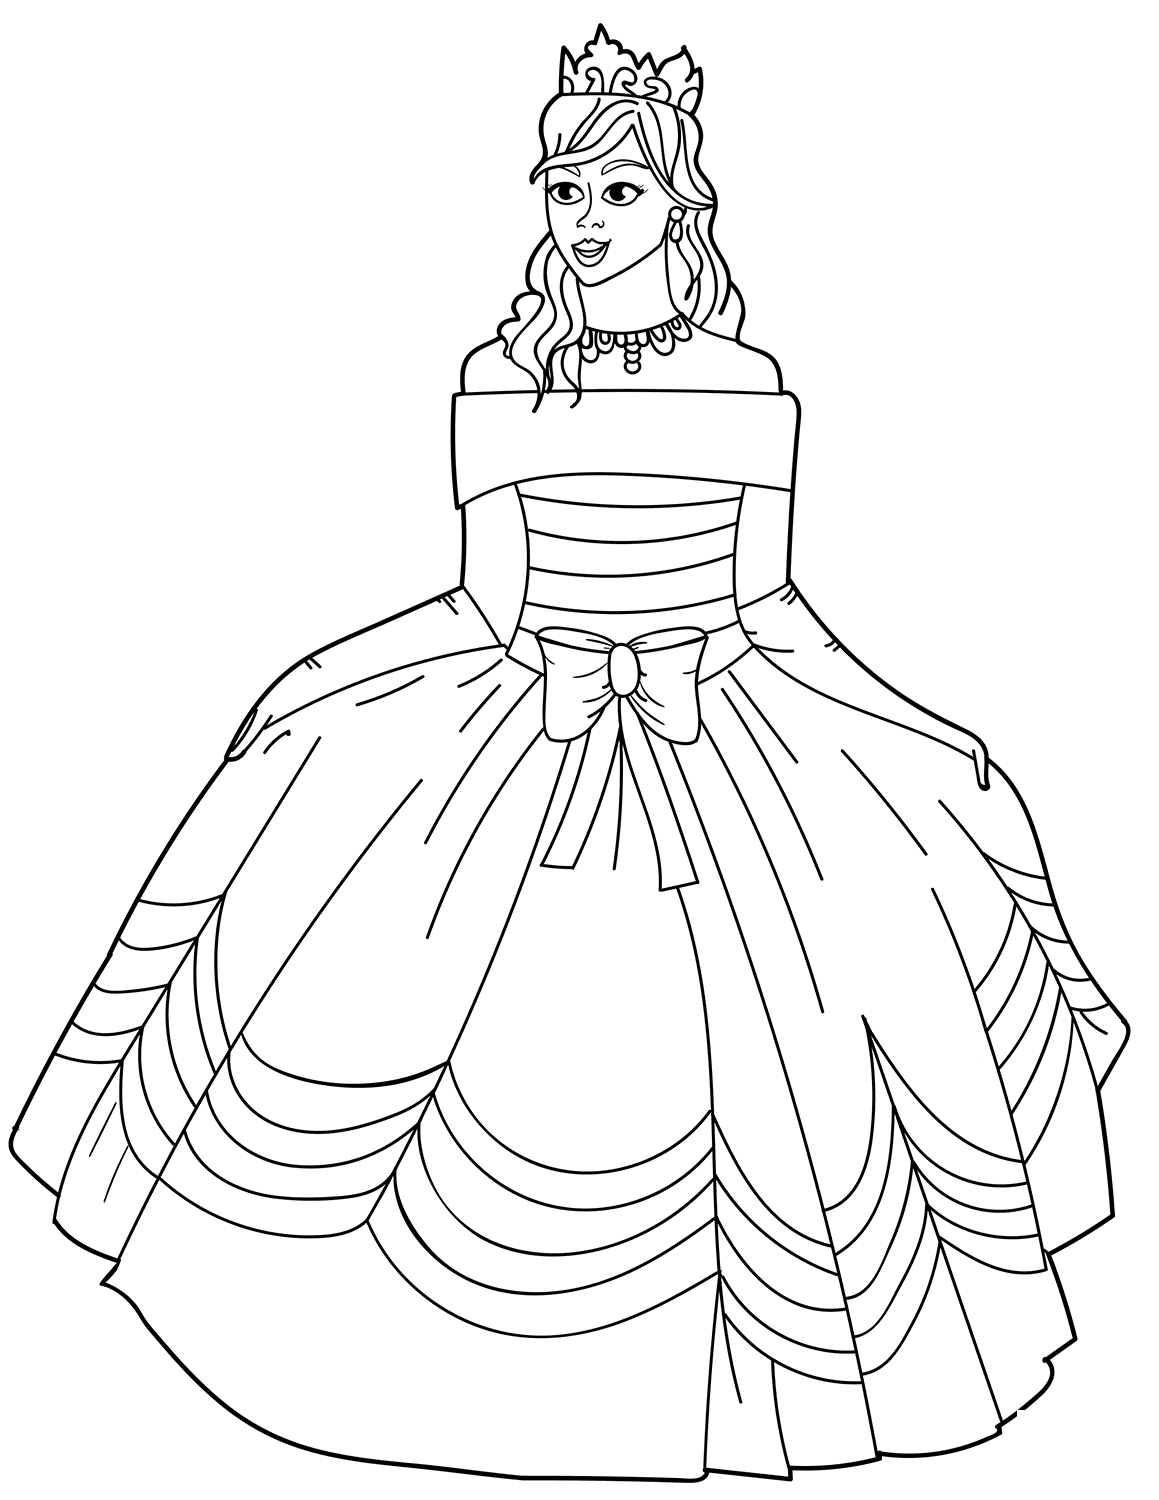 Princess In Ball Gown Off The Shoulder Dress Coloring Page